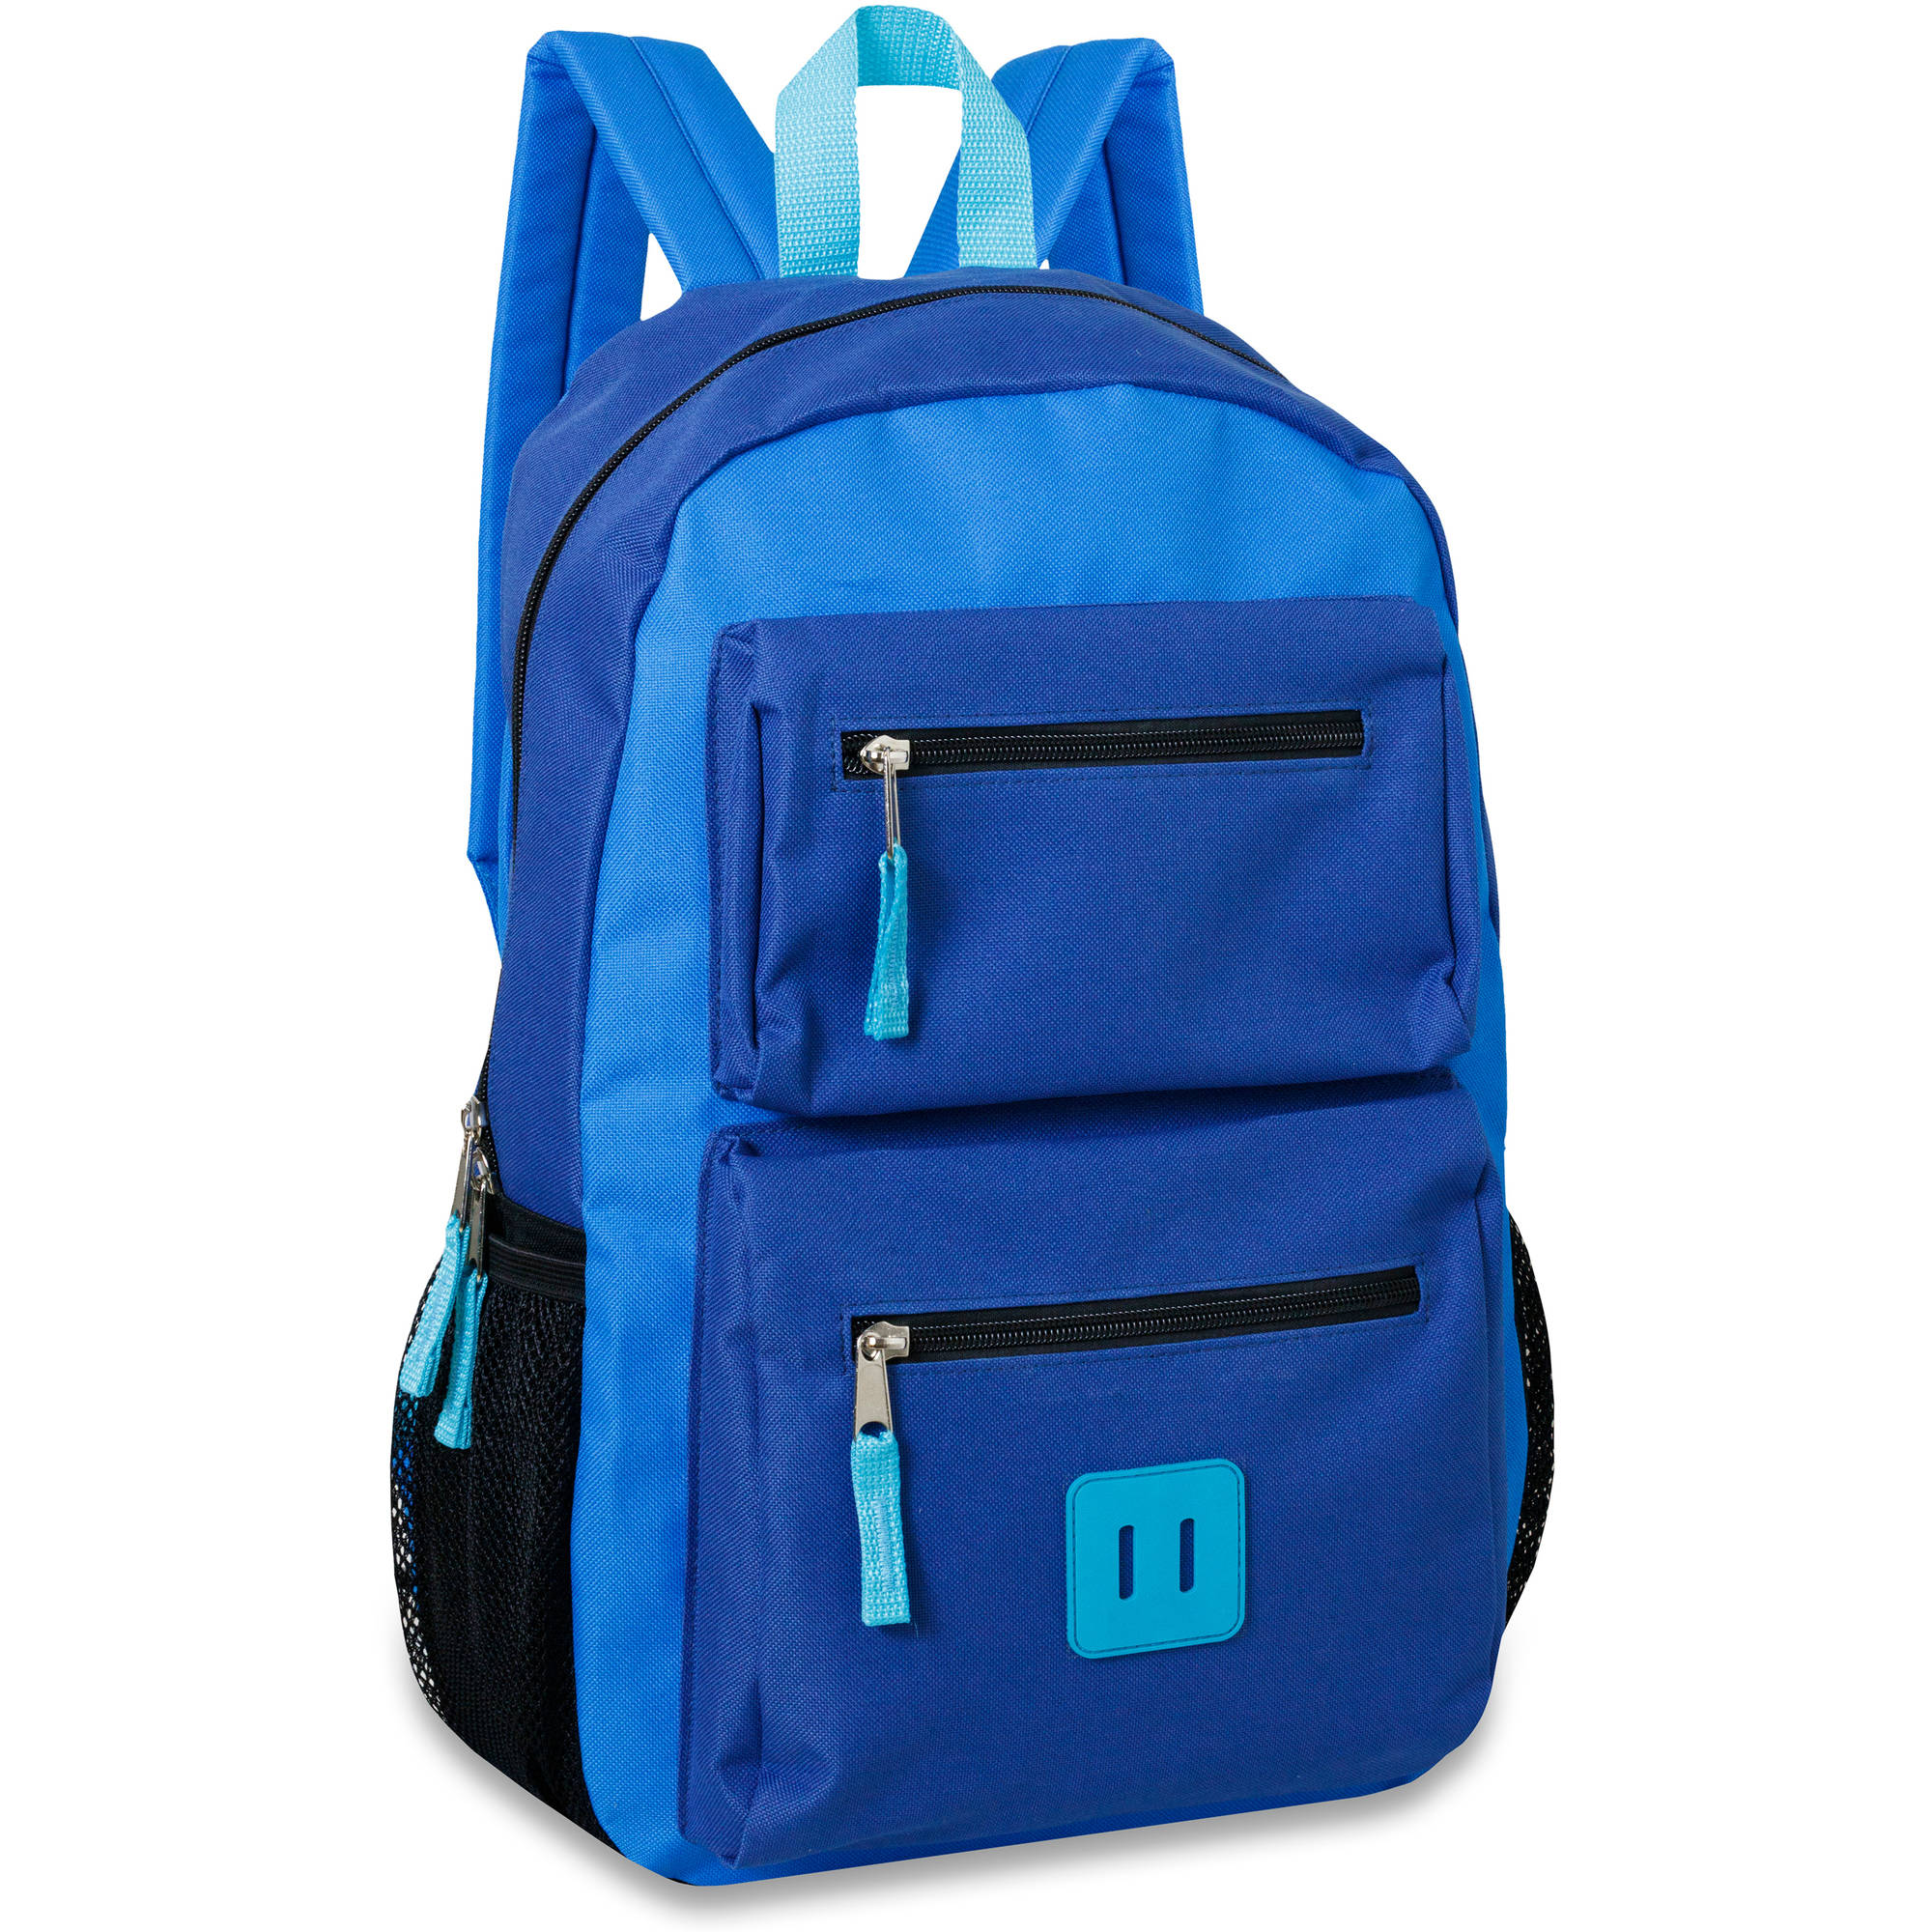 18 Inch Double Pocket Backpack - image 1 of 3